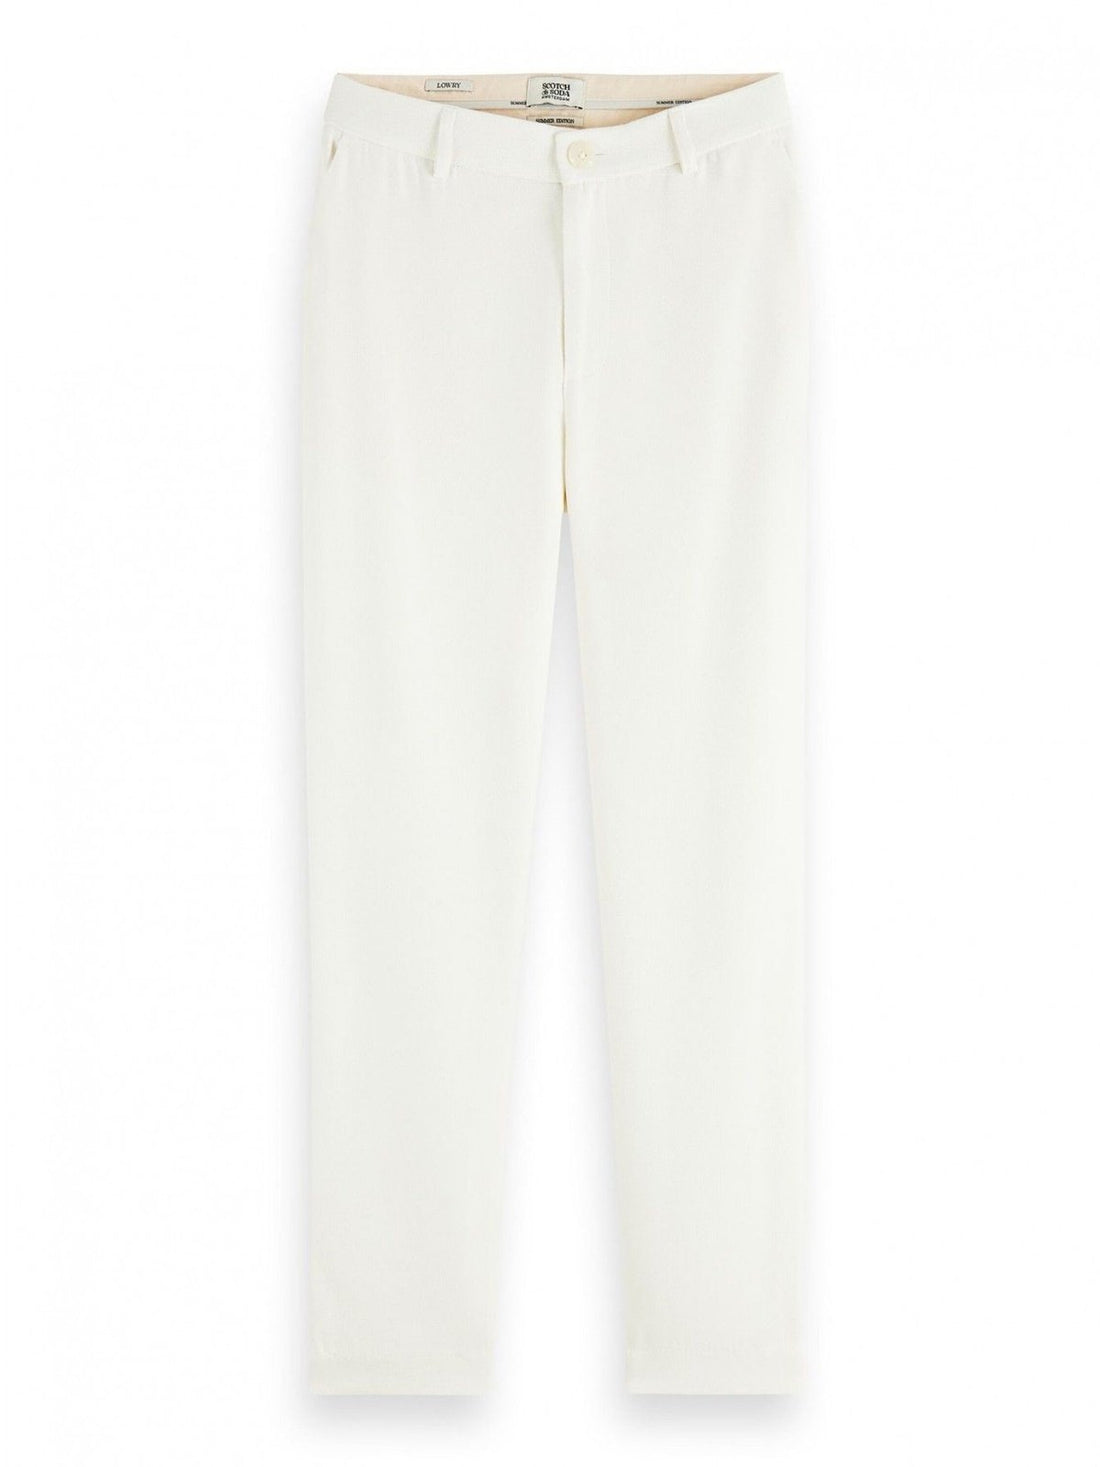 Lowry tailored slim fit structured trousers